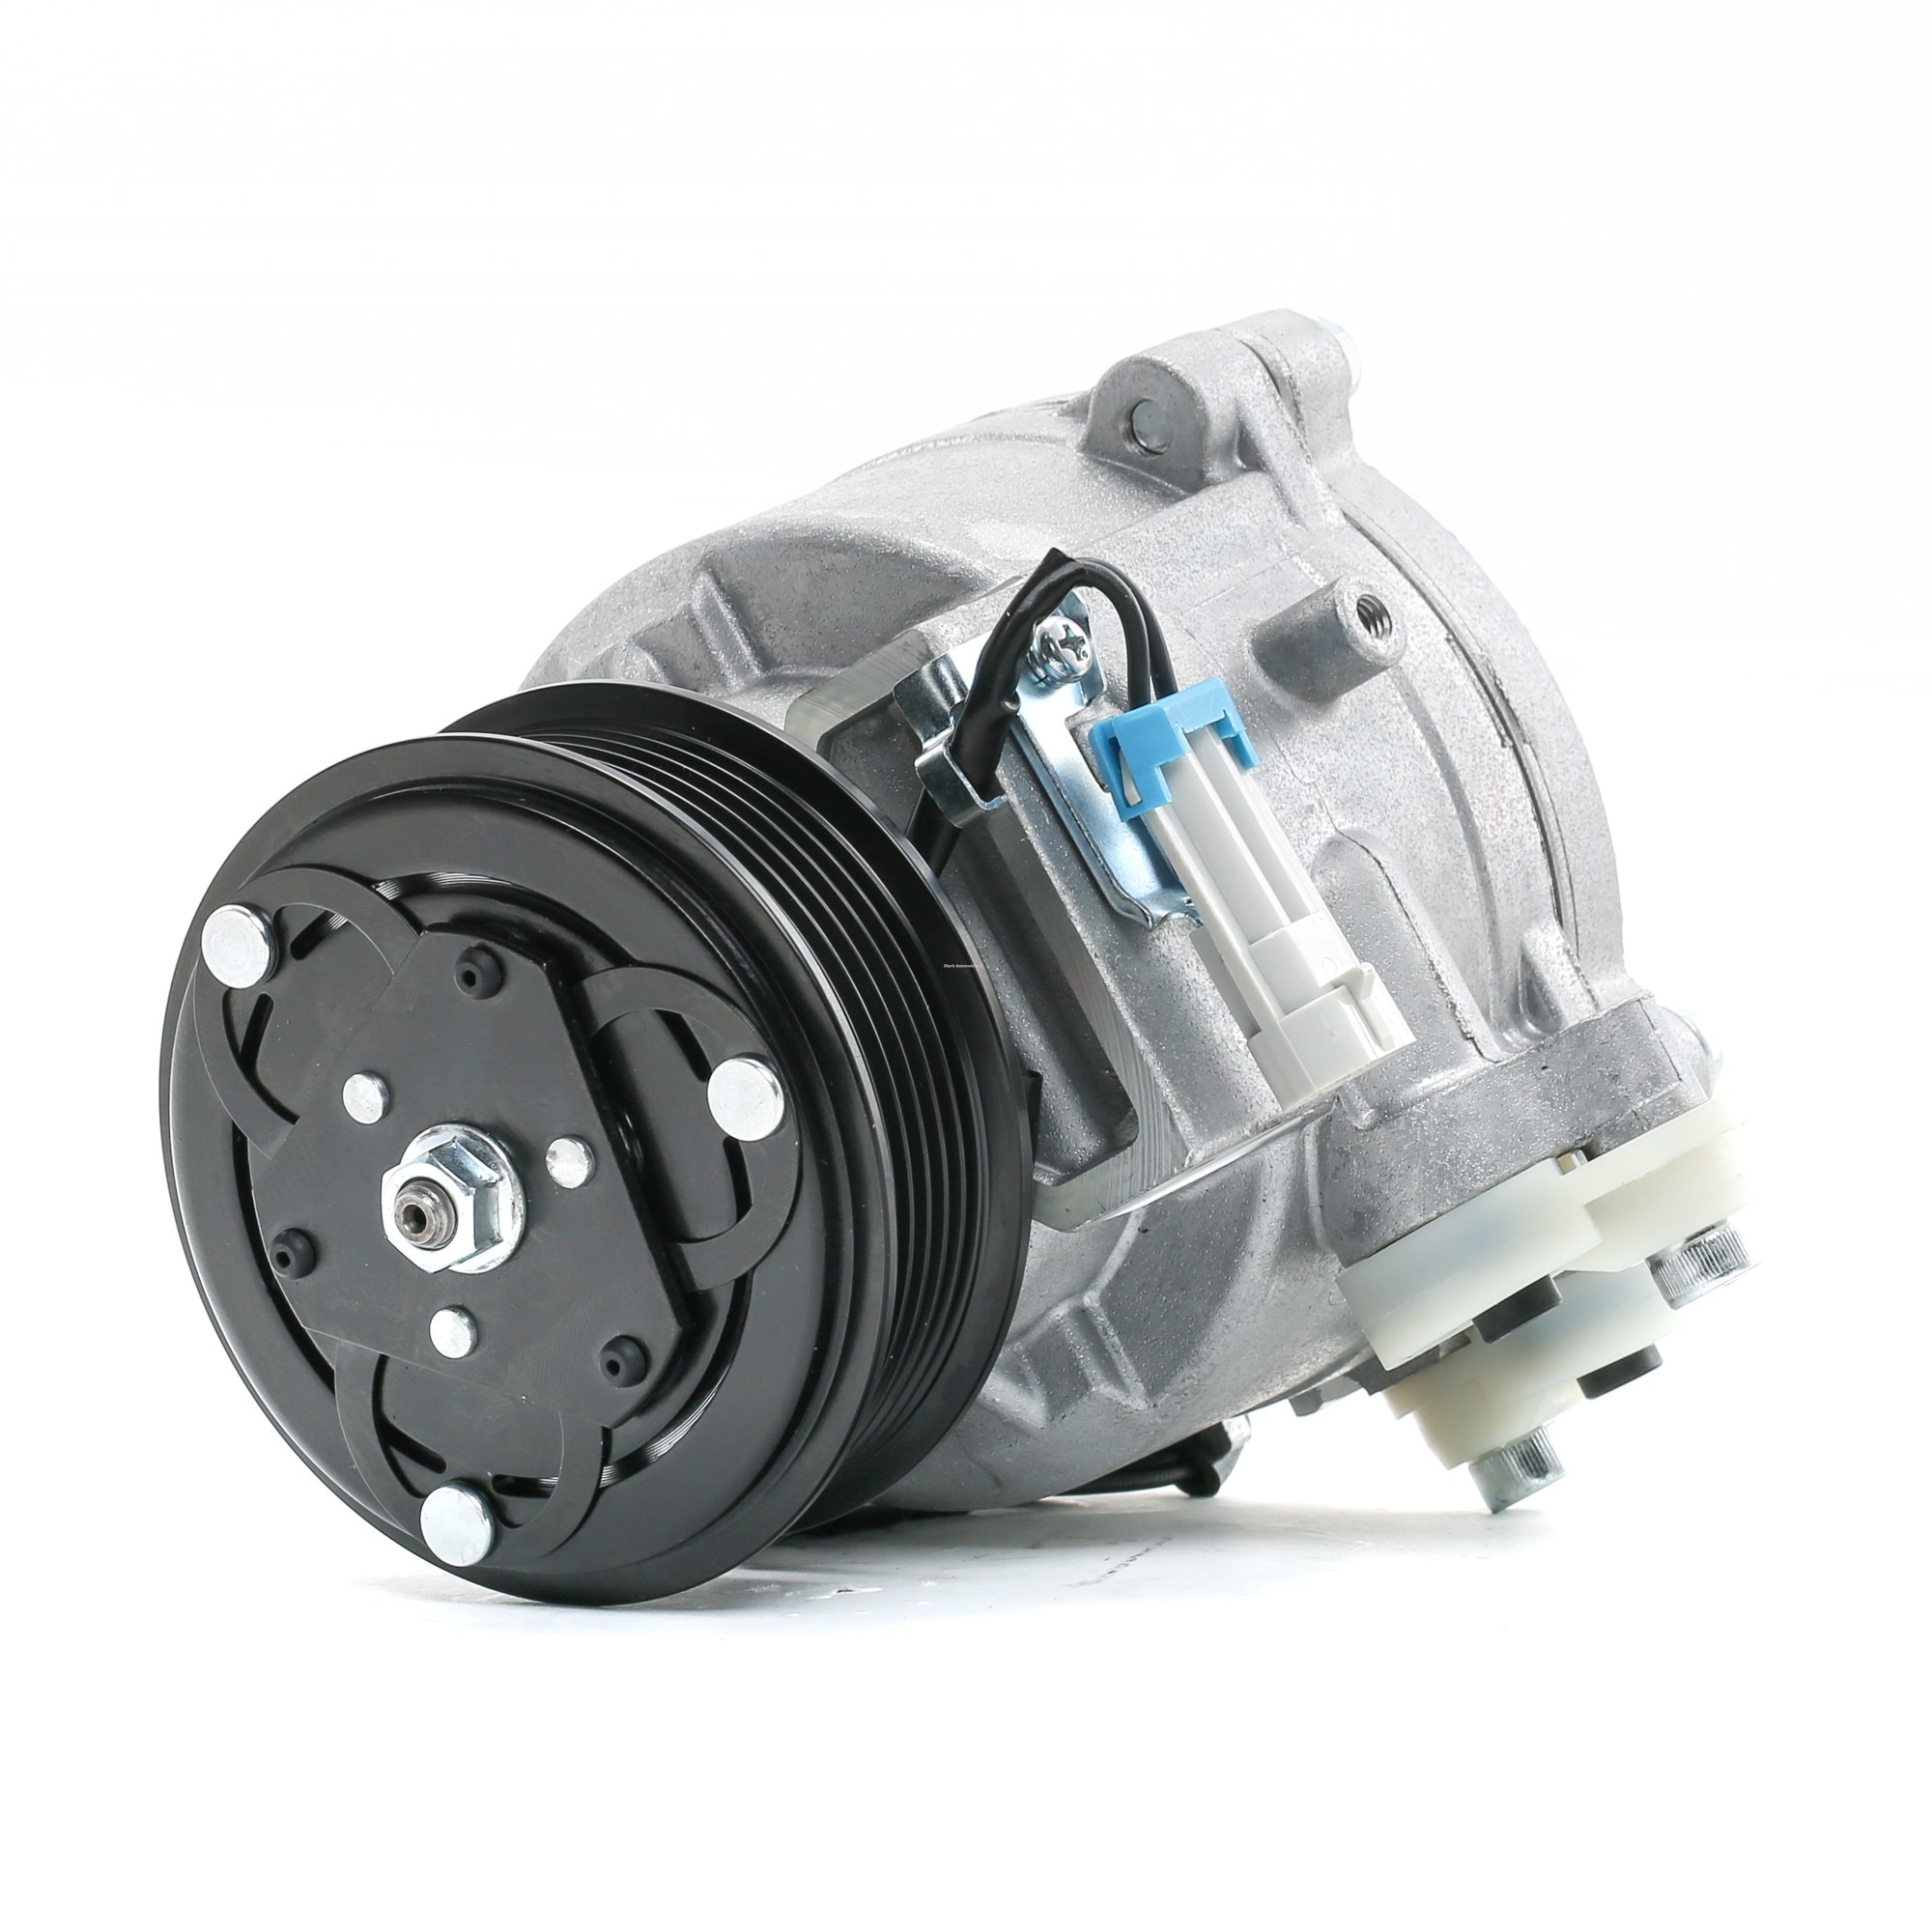 STARK SKKM-0340501 Air conditioning compressor QS90, PAG 46, R 1234yf, R 134a, with accessories